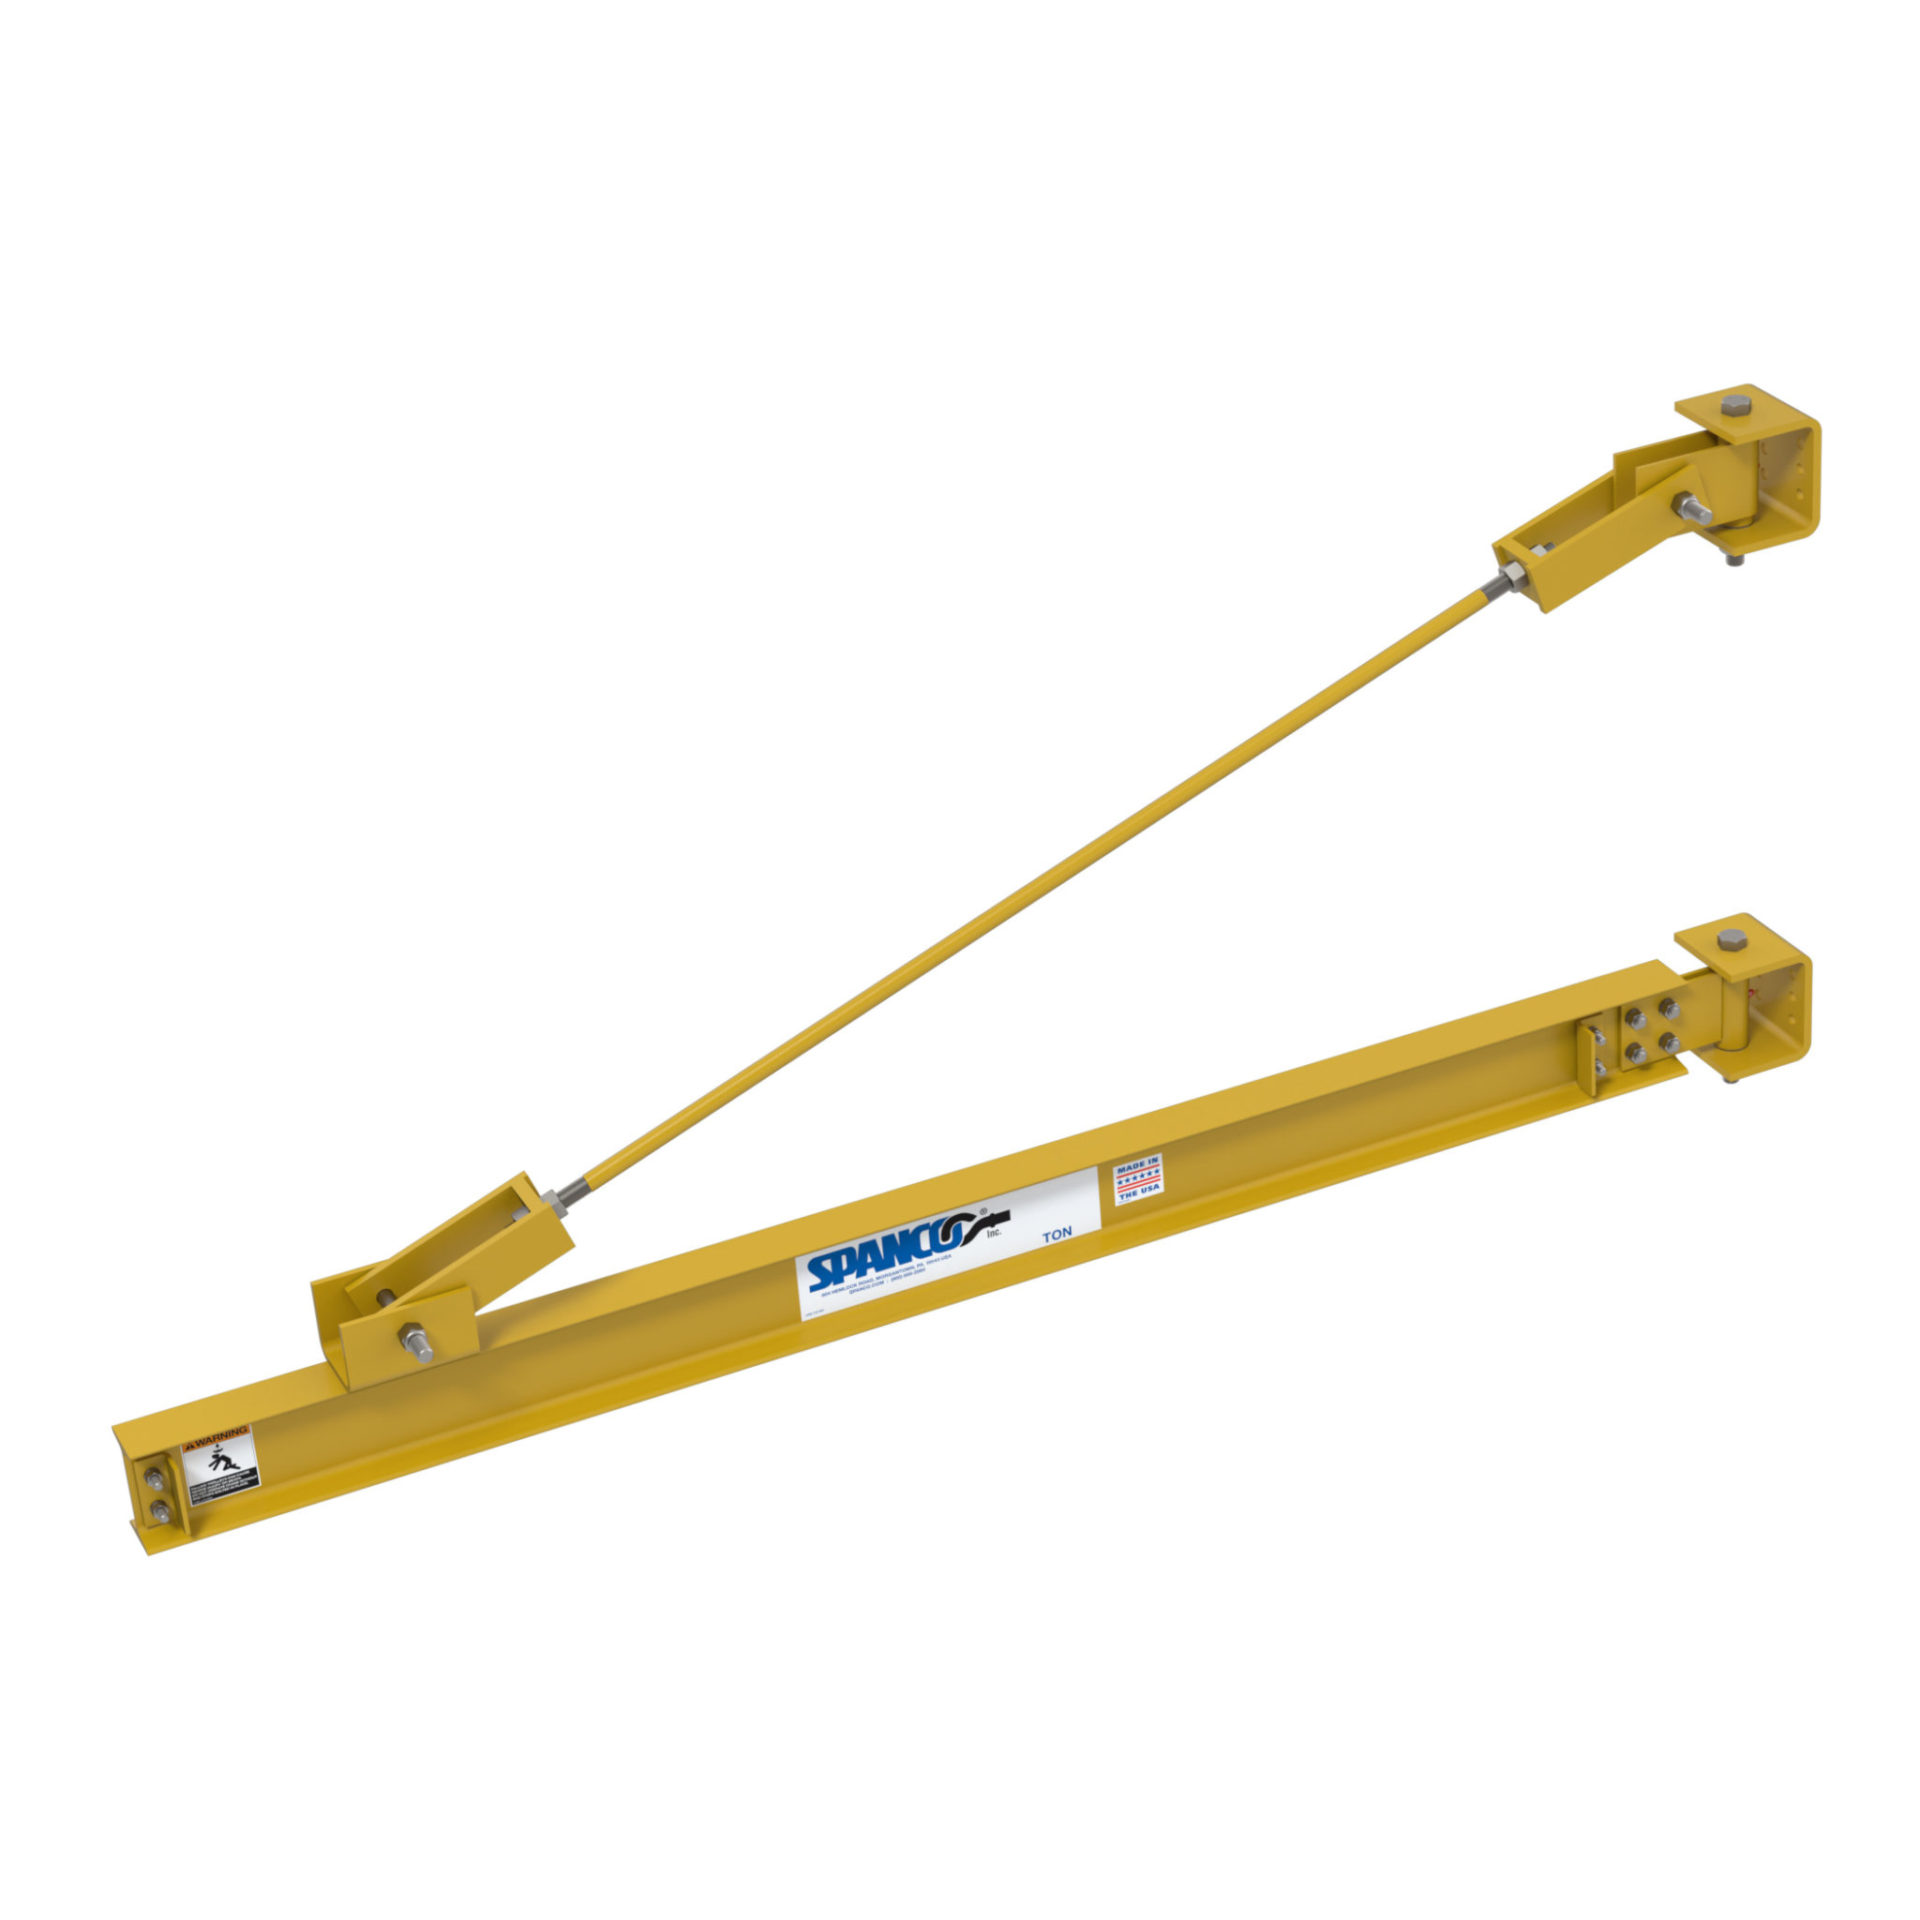 Wall mounted jib crane - tie-rod suppored - 301 series